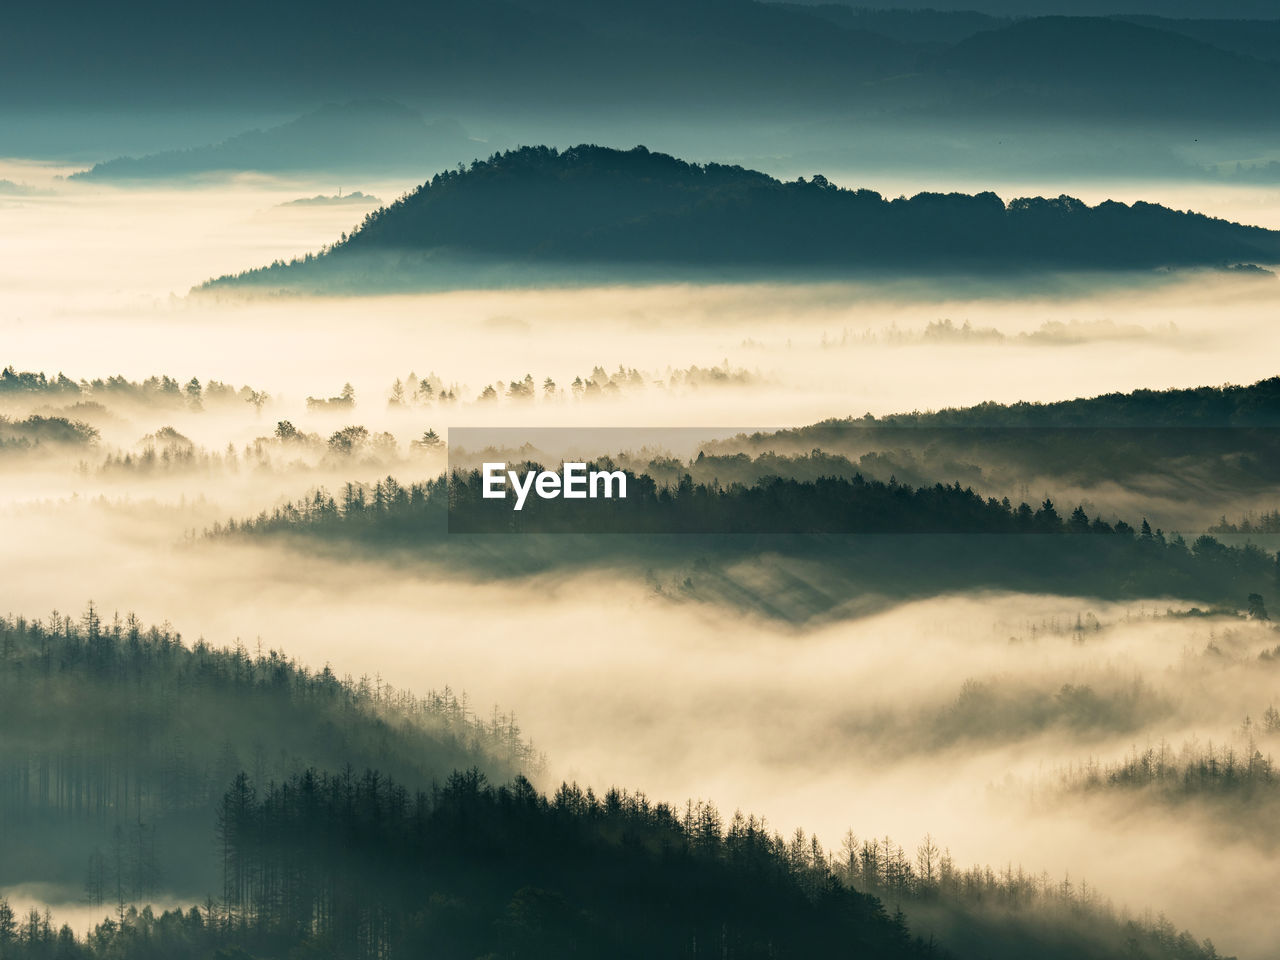 Fog flowing over forest mountains. misty mountain landscape hills after rainy night. idyllic valley